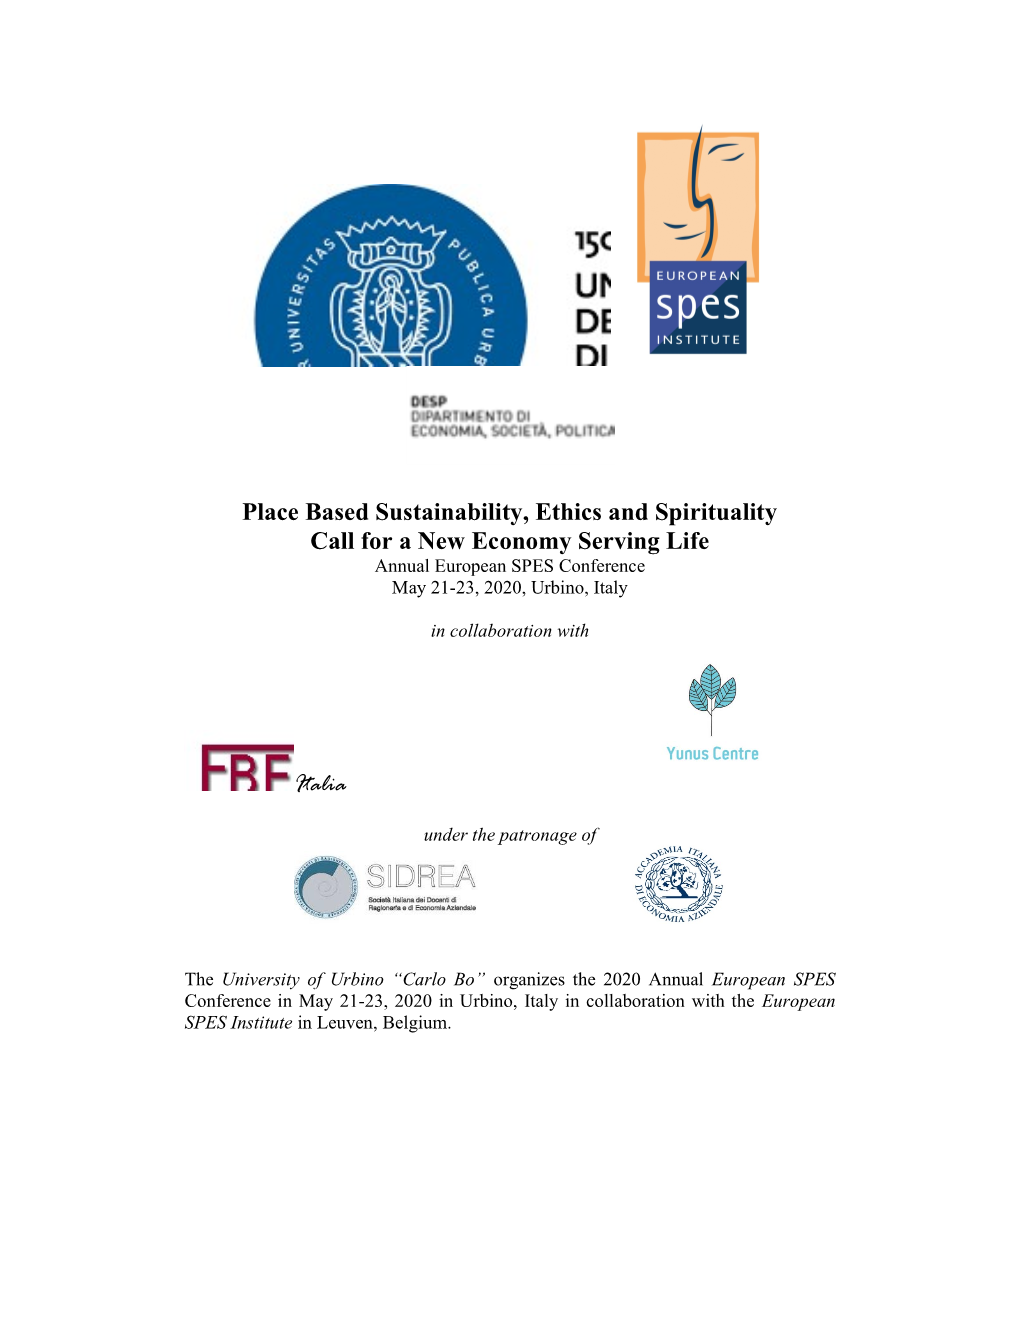 Place Based Sustainability, Ethics and Spirituality Call for a New Economy Serving Life Annual European SPES Conference May 21-23, 2020, Urbino, Italy